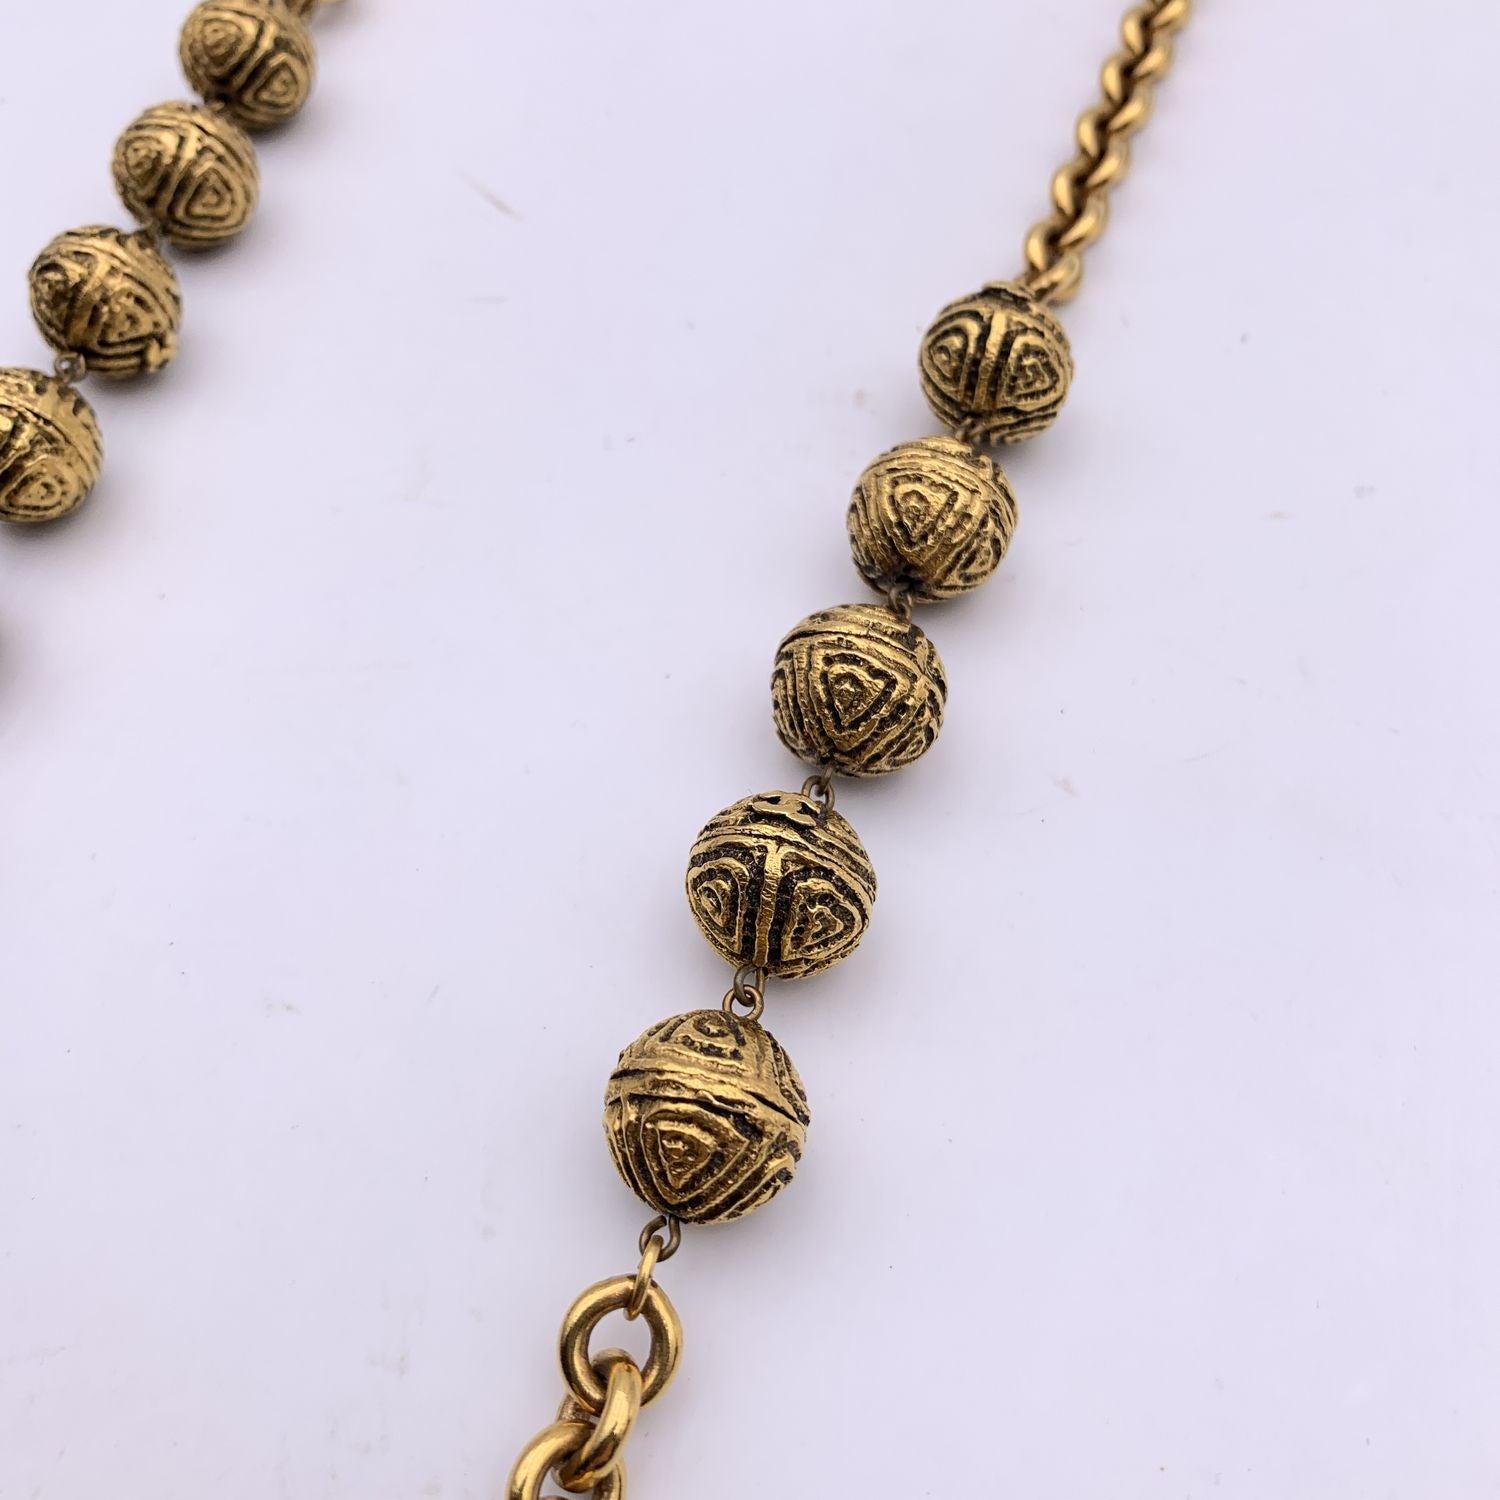 Women's Chanel Vintage 1980s Gold Metal Chain Necklace with Metal Beads